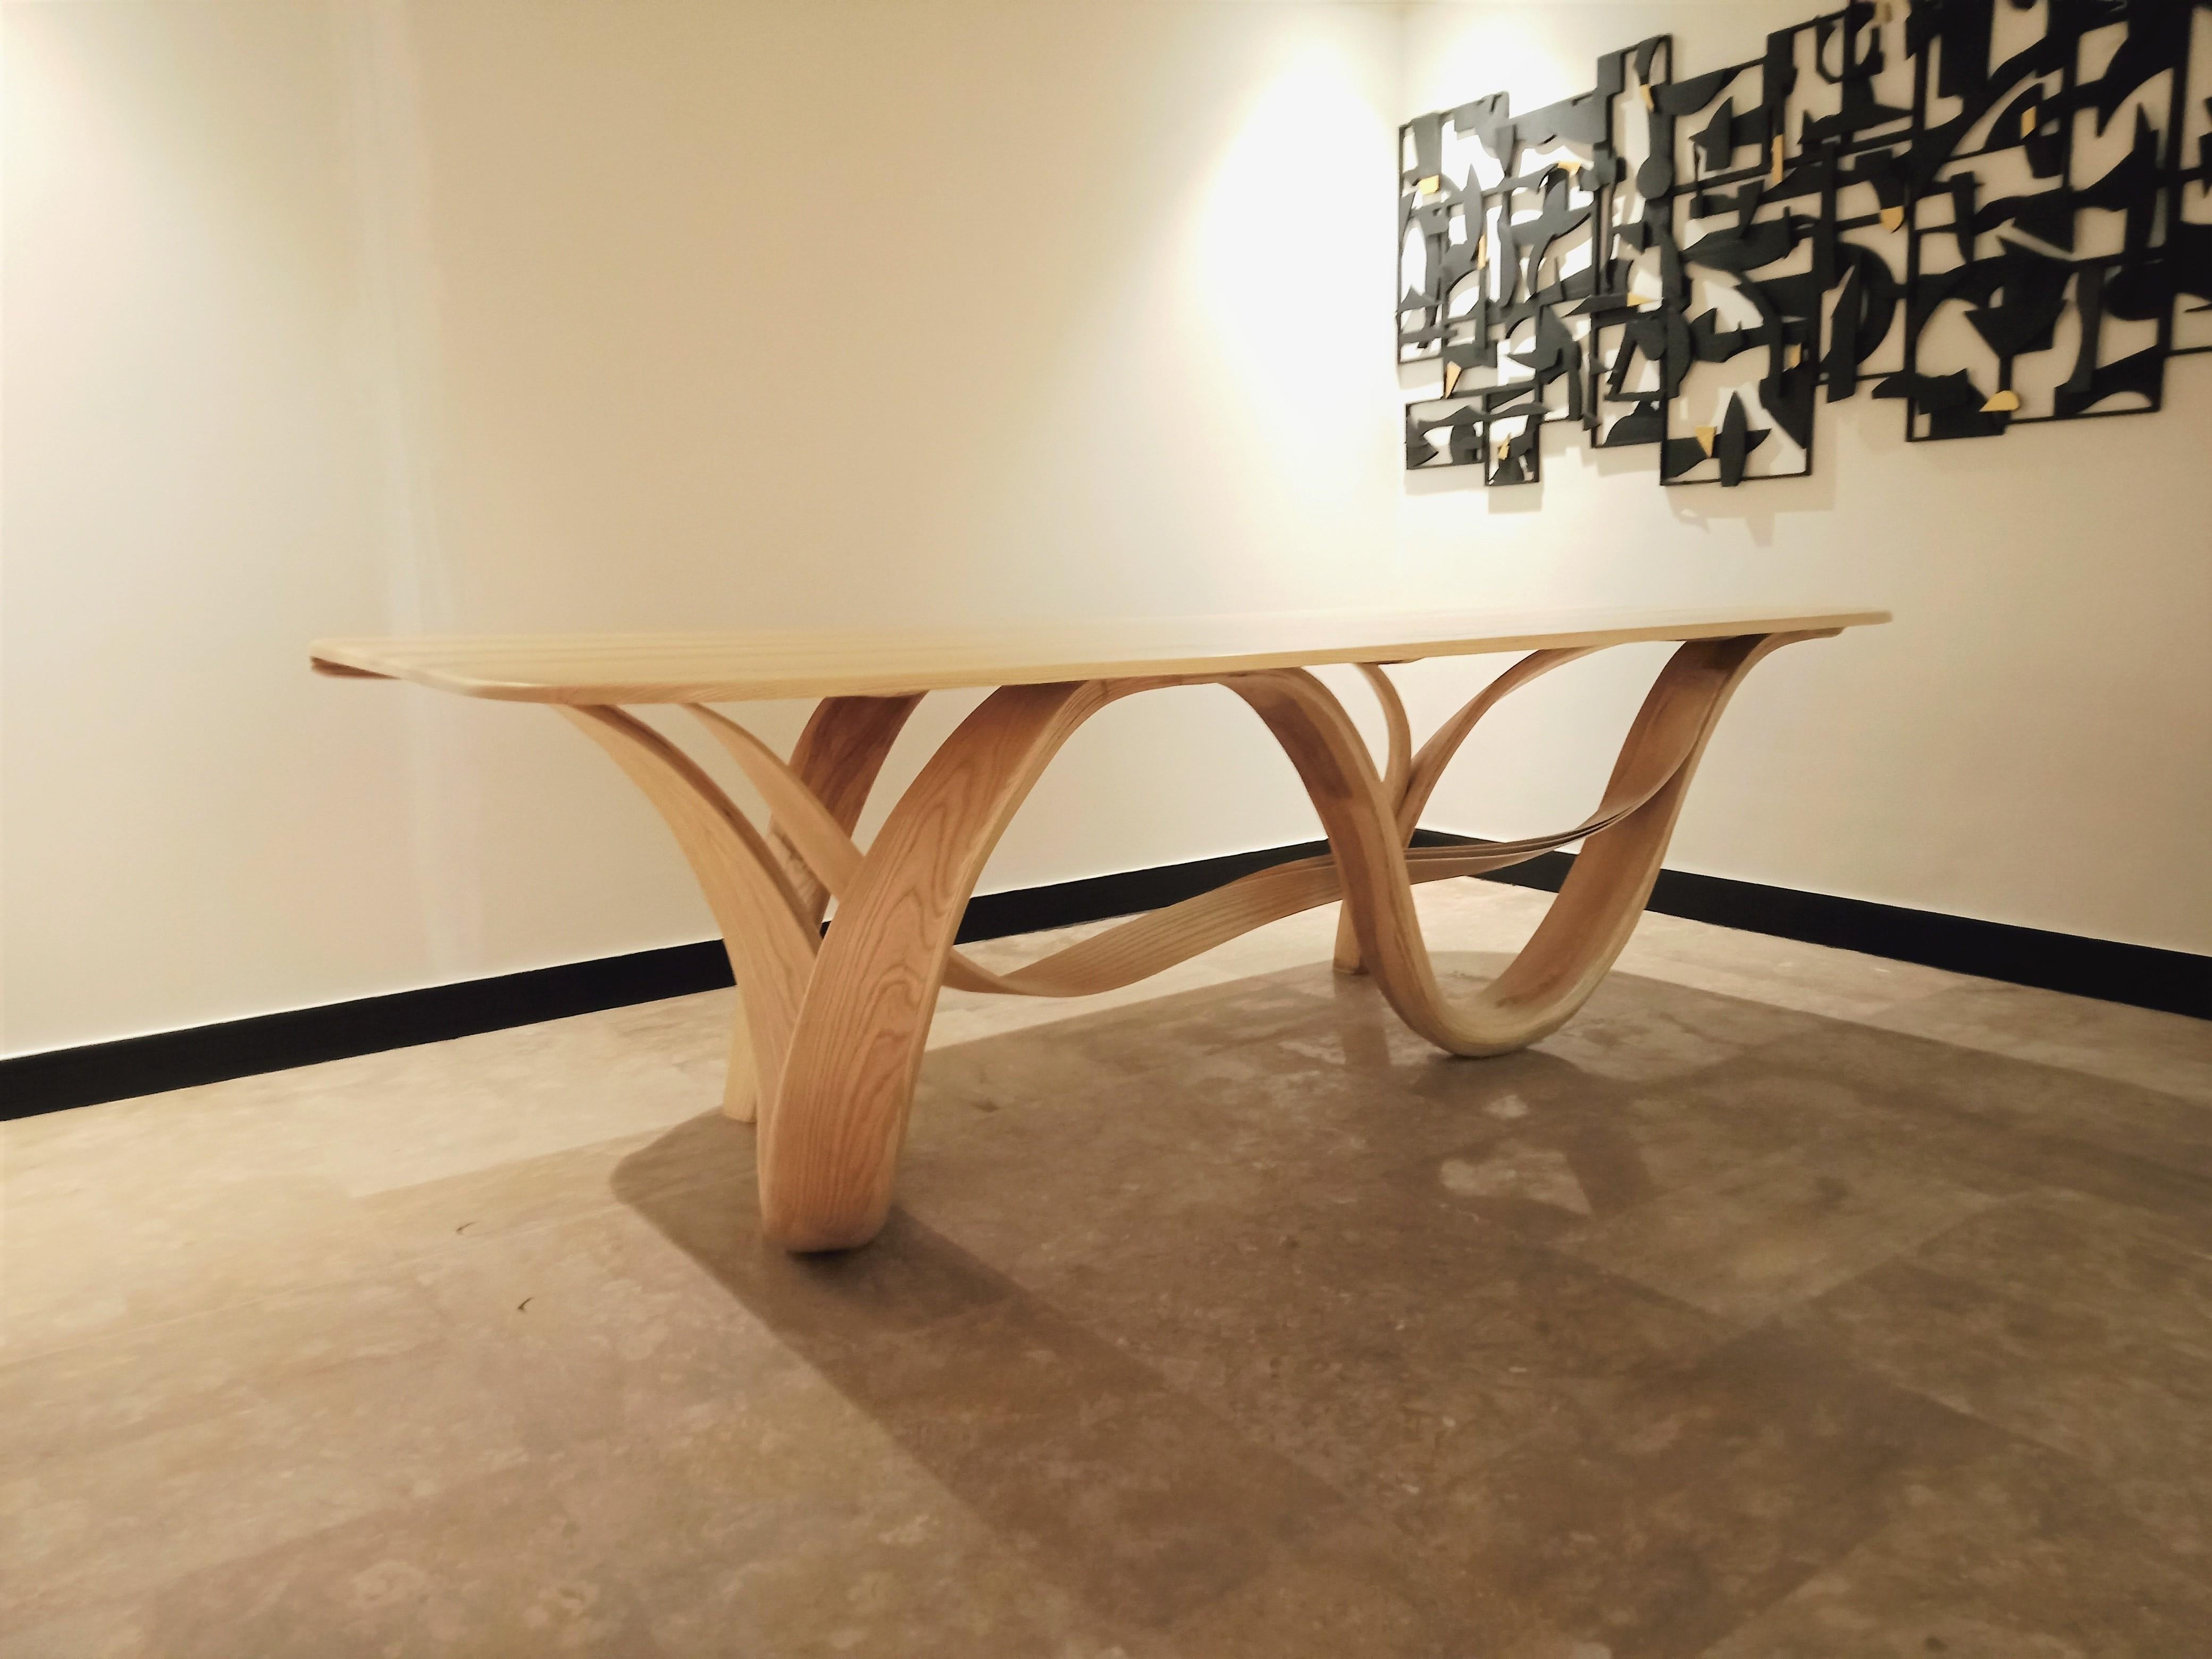 bent wood table